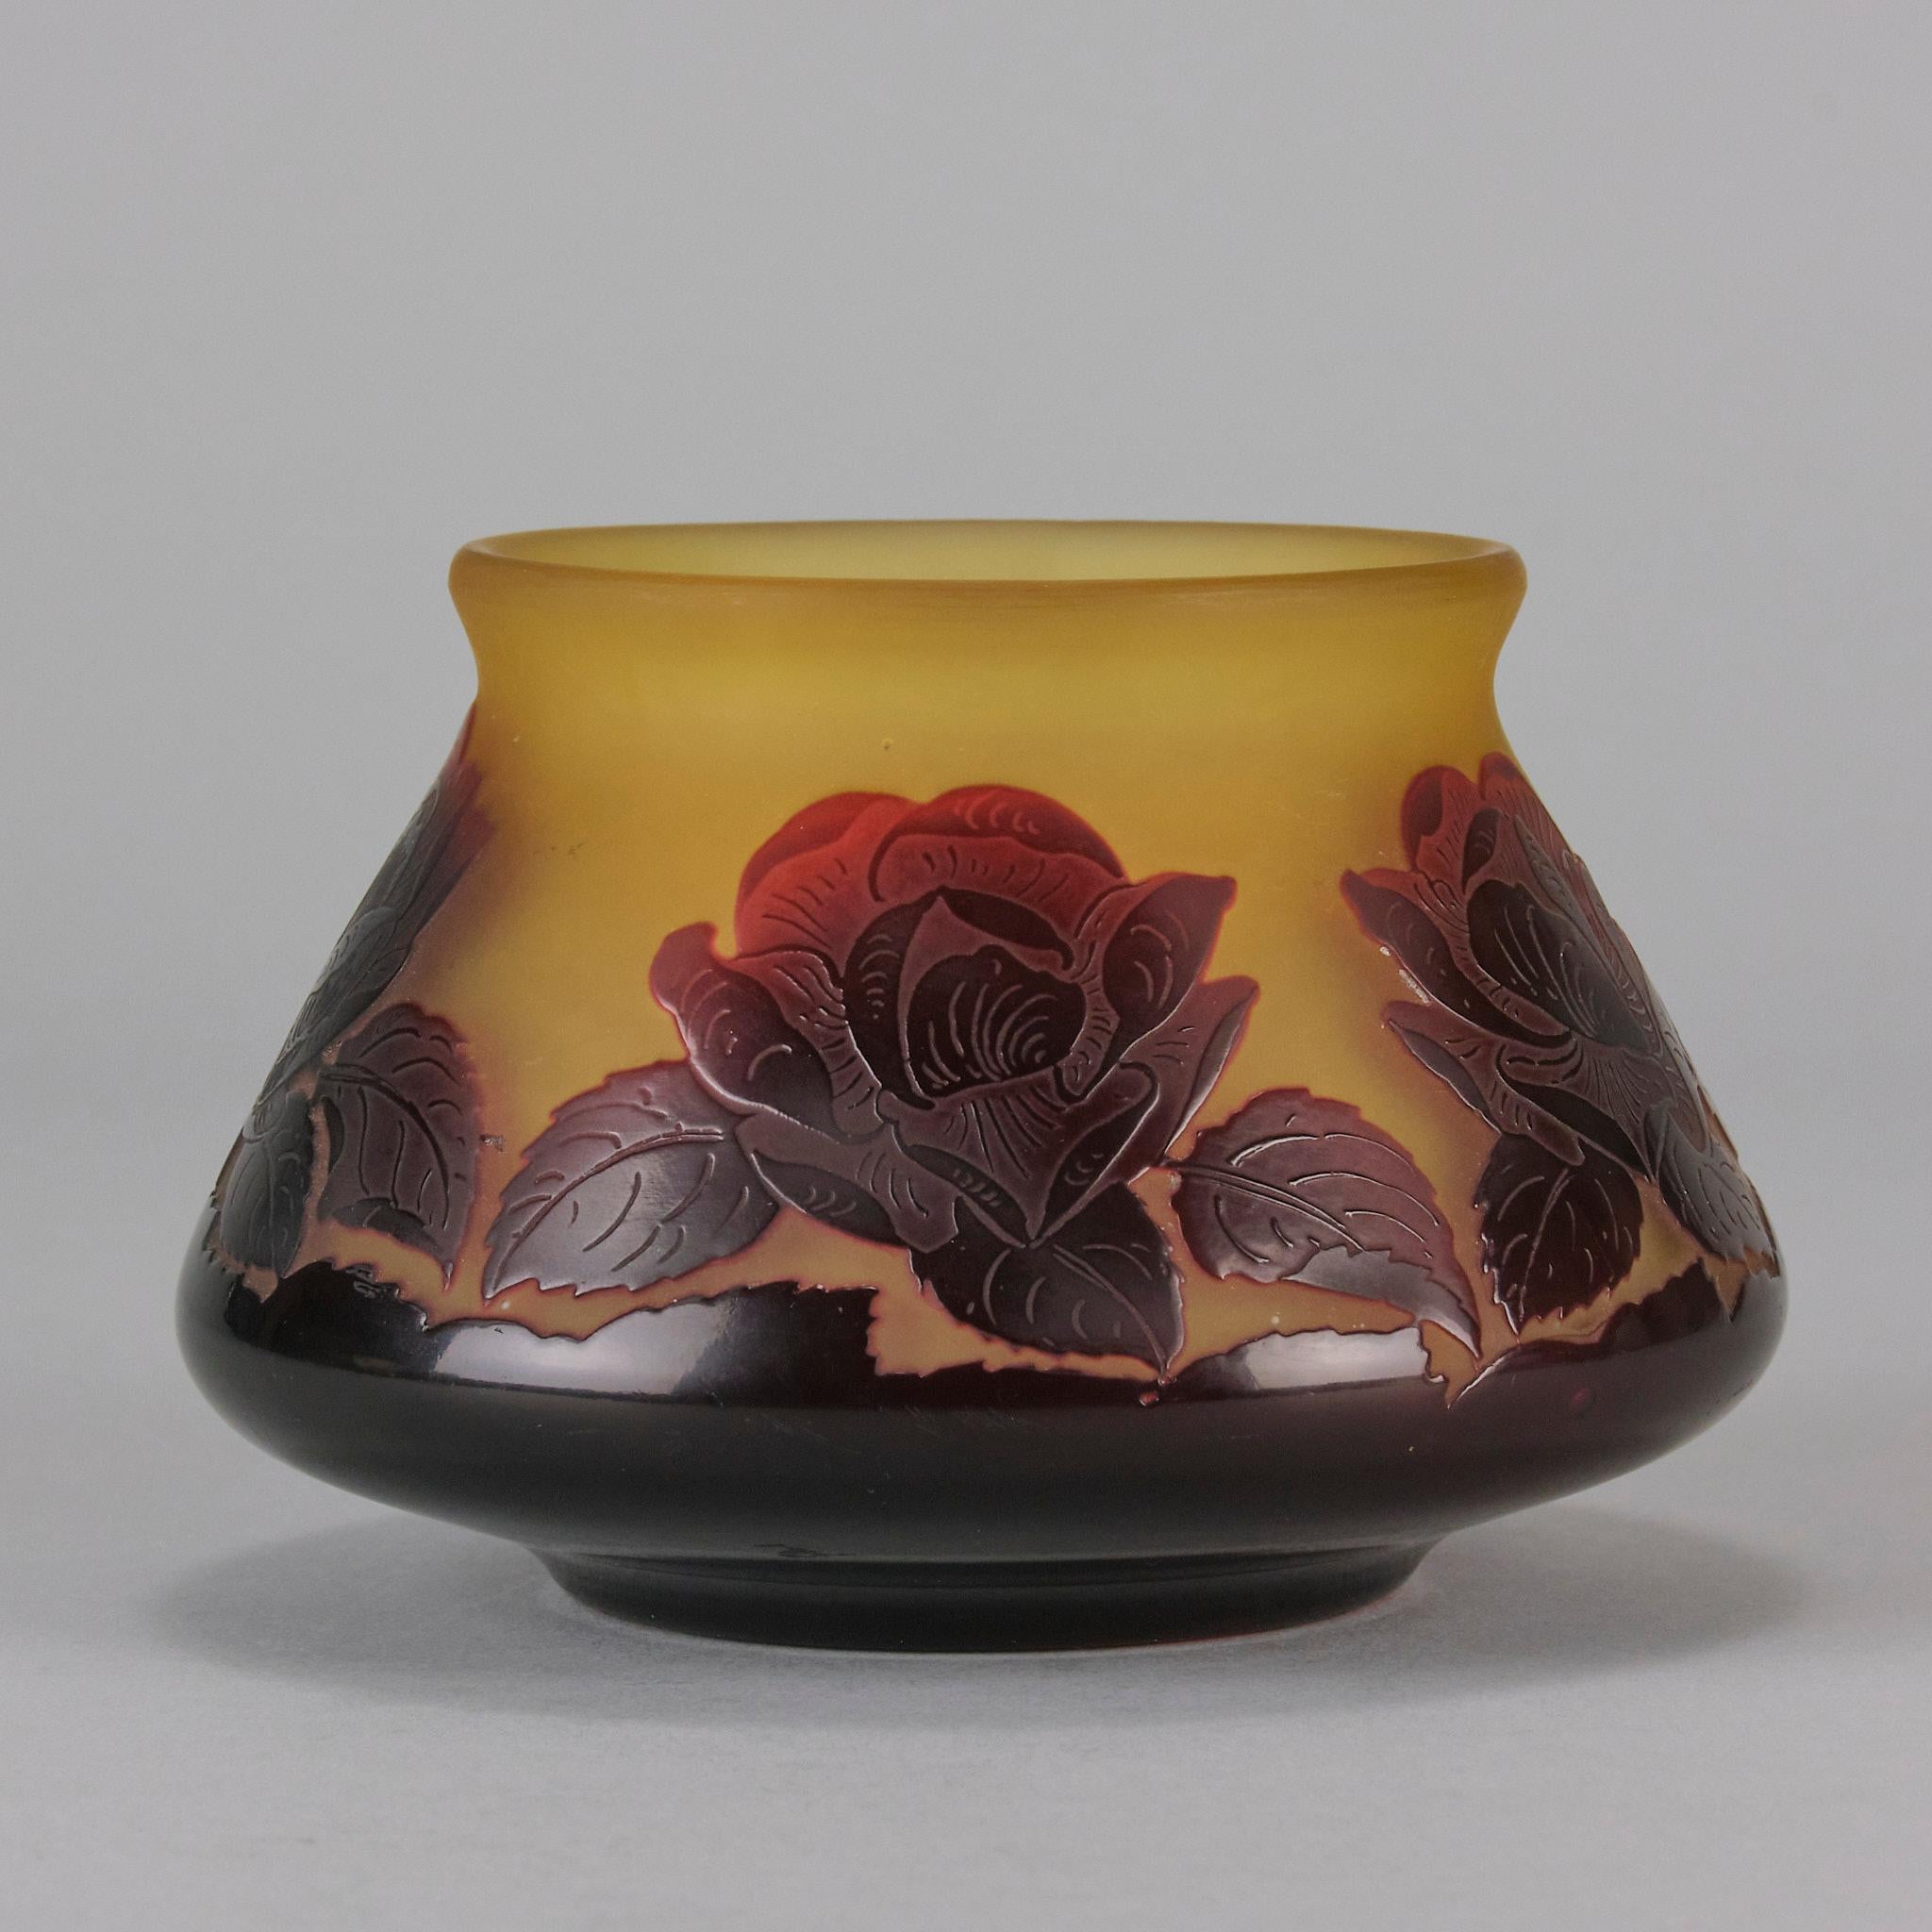 A beautiful early 20th Century cameo glass vase acid cut and etched with a deep red floral decoration against a yellow background. Exhibiting very fine hand finised surface detail and vibrant colour, signed P.Nicolas in cameo

ADDITIONAL